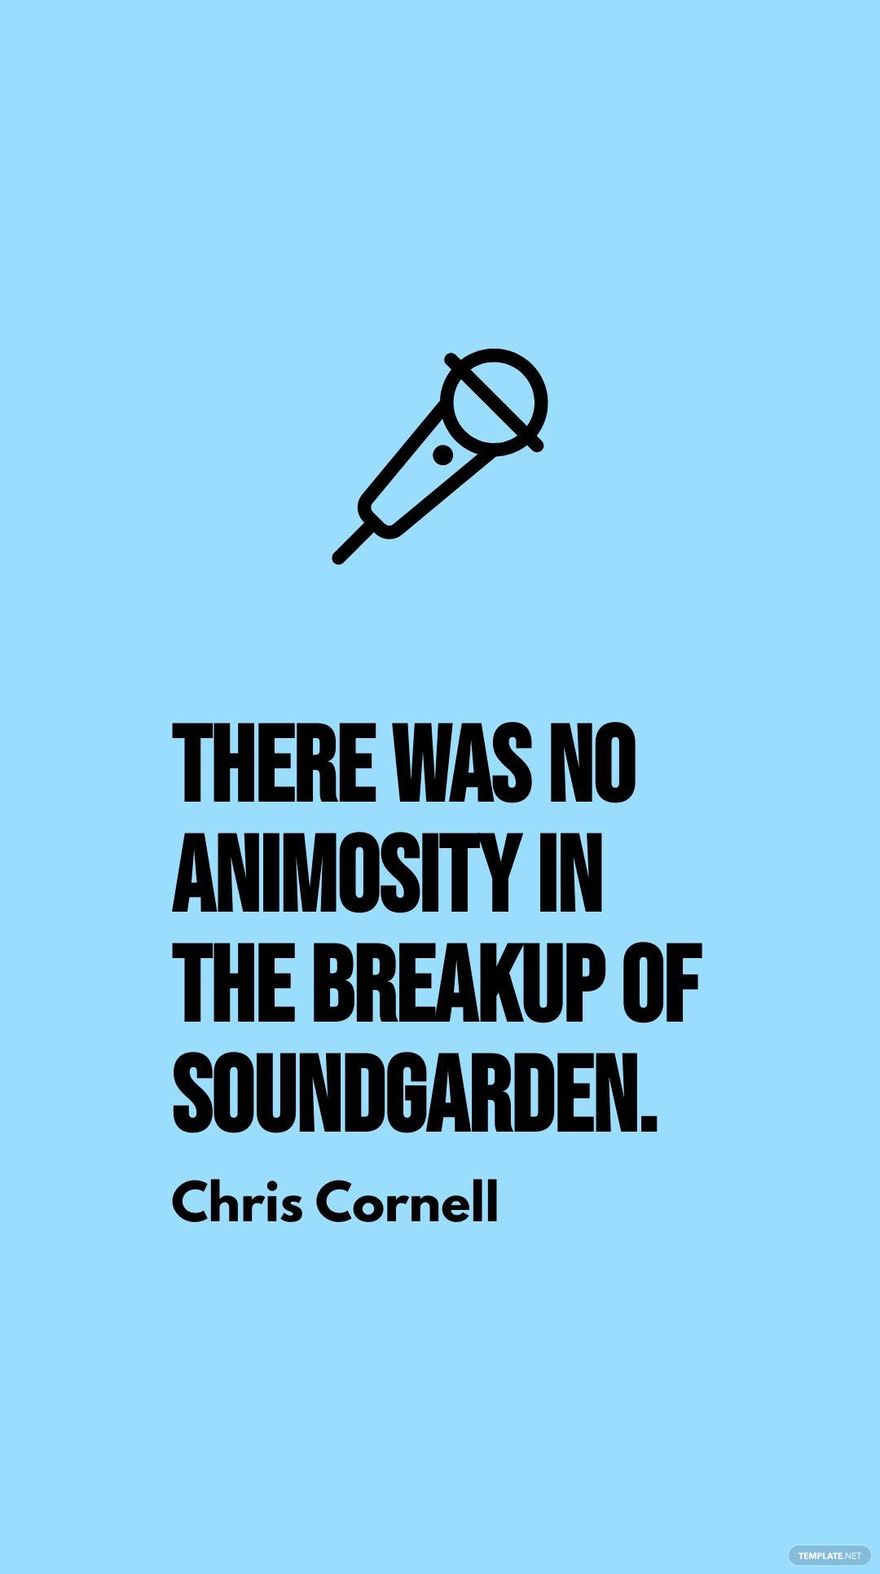 Free Chris Cornell - There was no animosity in the breakup of Soundgarden. in JPG